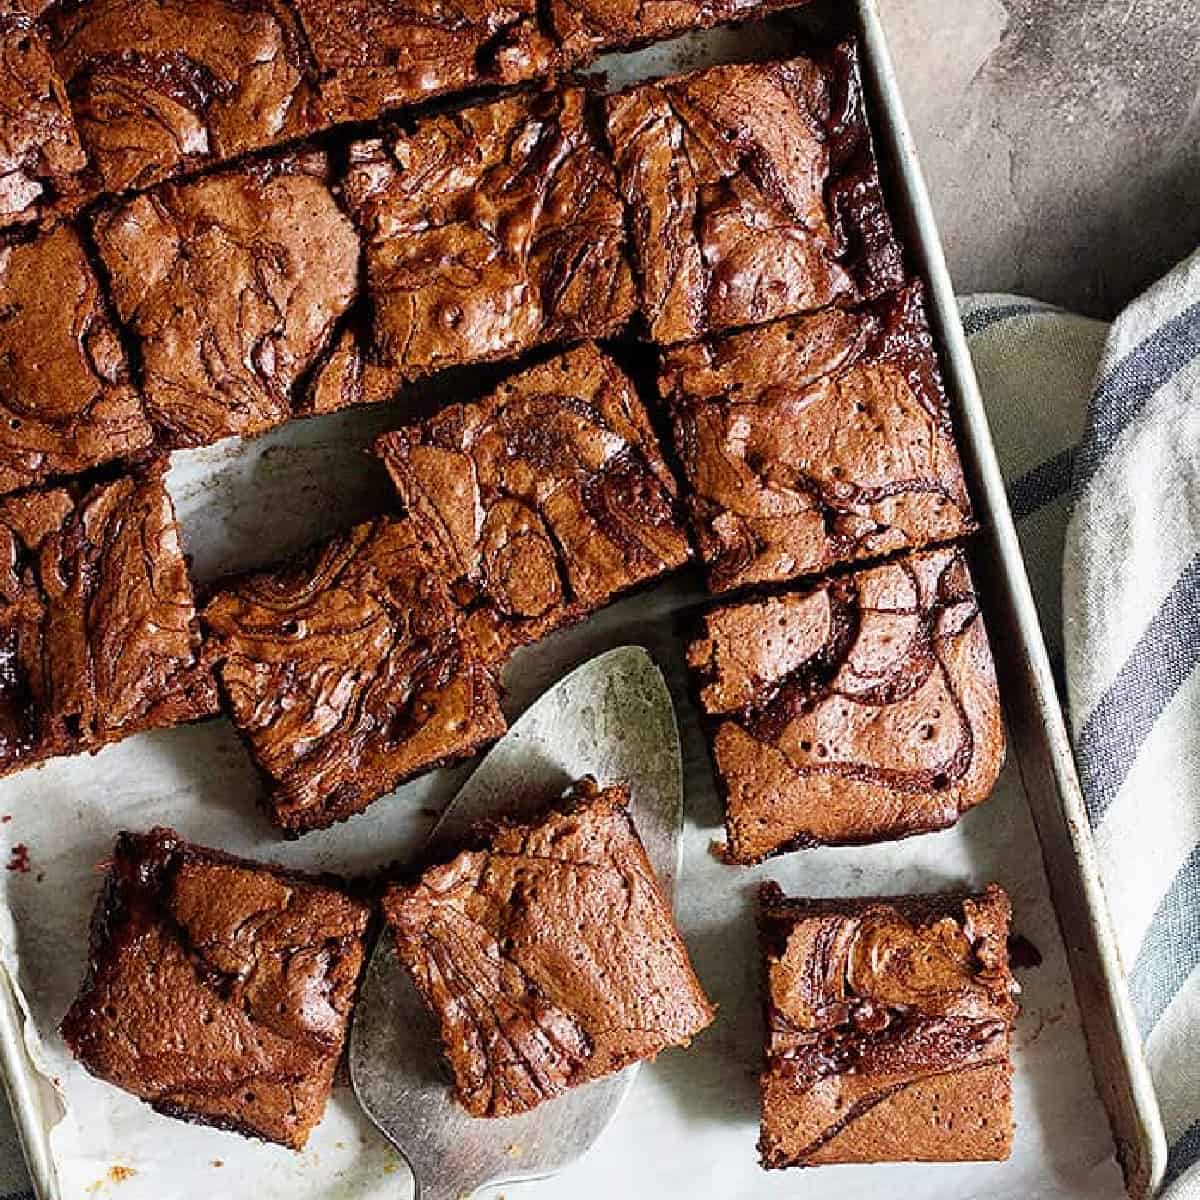 Let's talk caramel brownies! Fudgy chocolate brownies with a caramel swirl that will make you want to eat the whole pan! These caramel brownies are super good!
